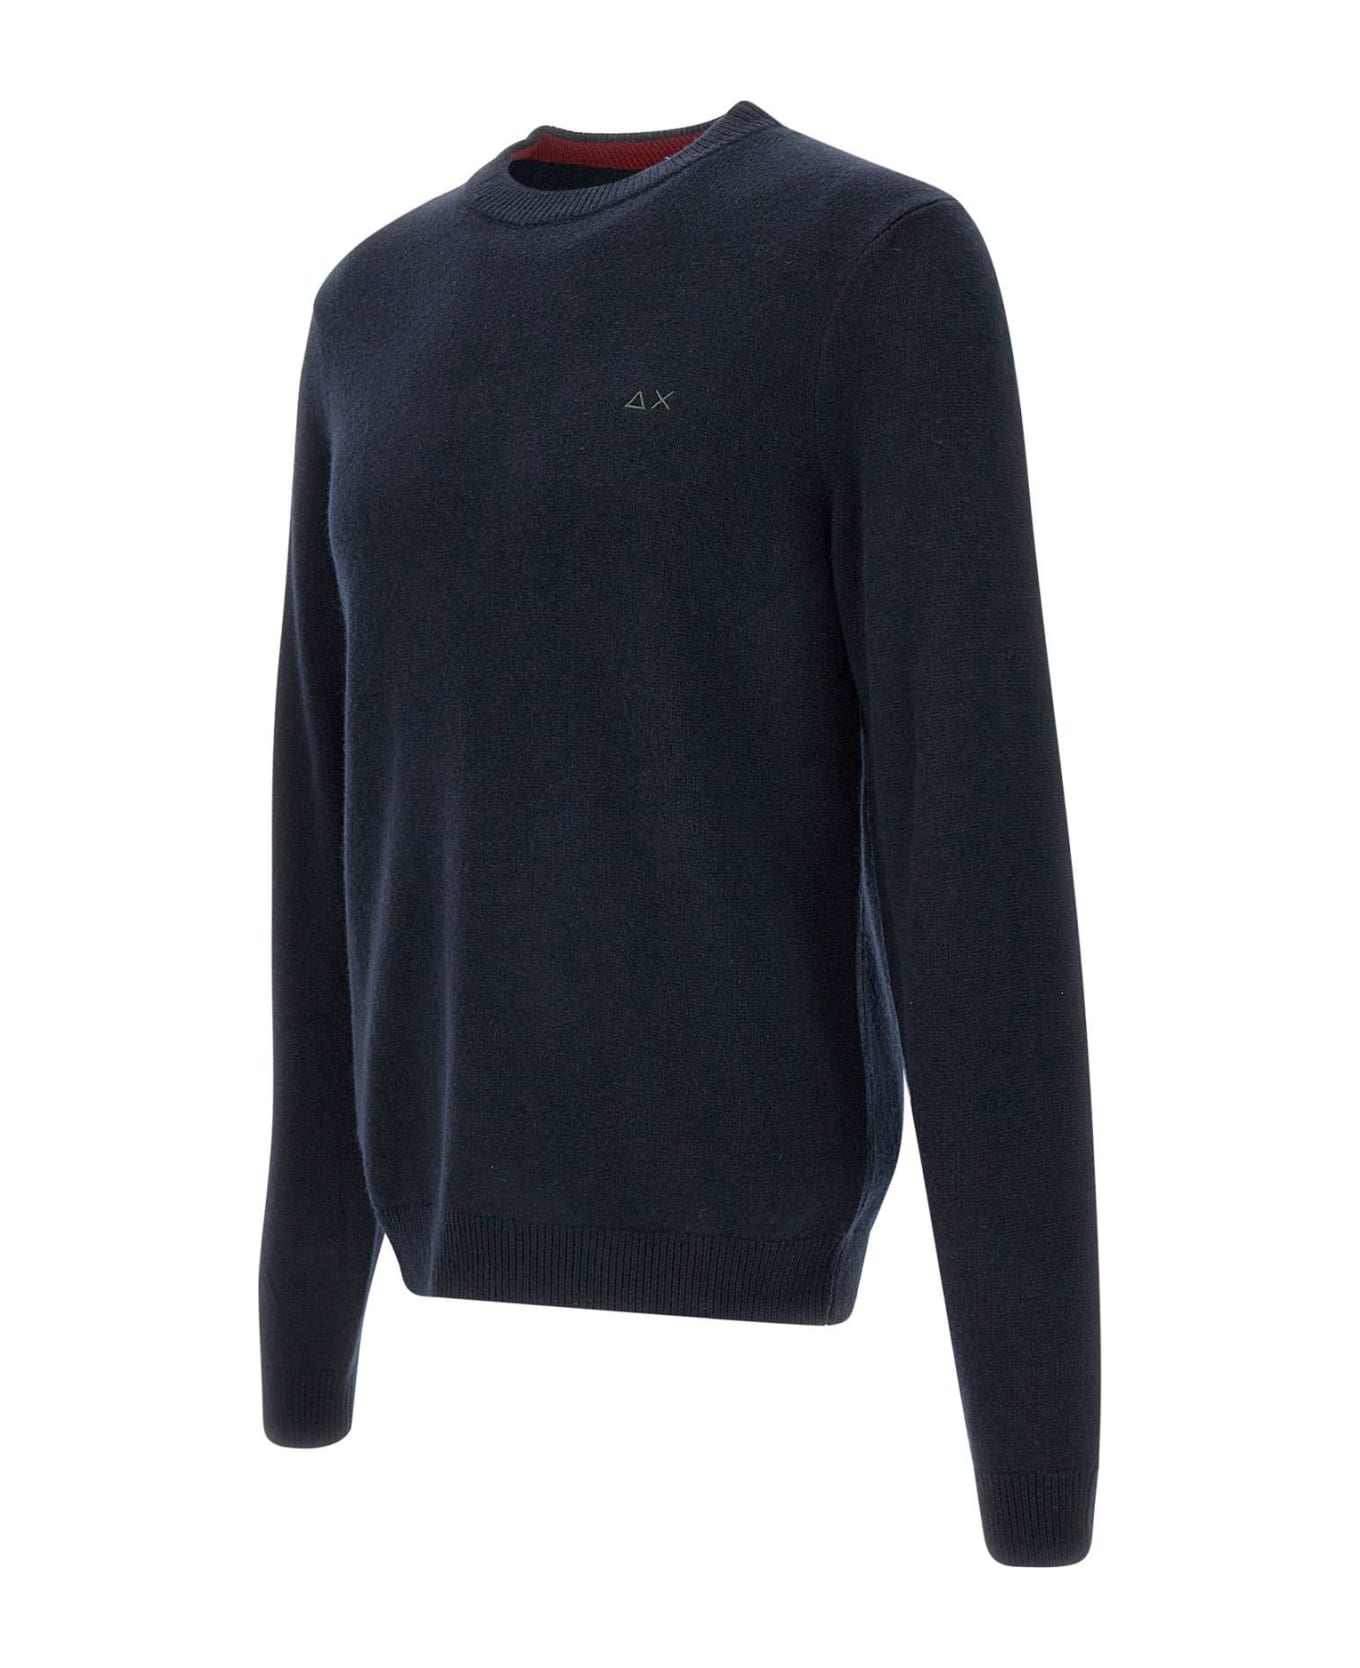 Sun 68 'round Solid' Wool And Viscose Blend Pullover Sweater - NAVY BLUE